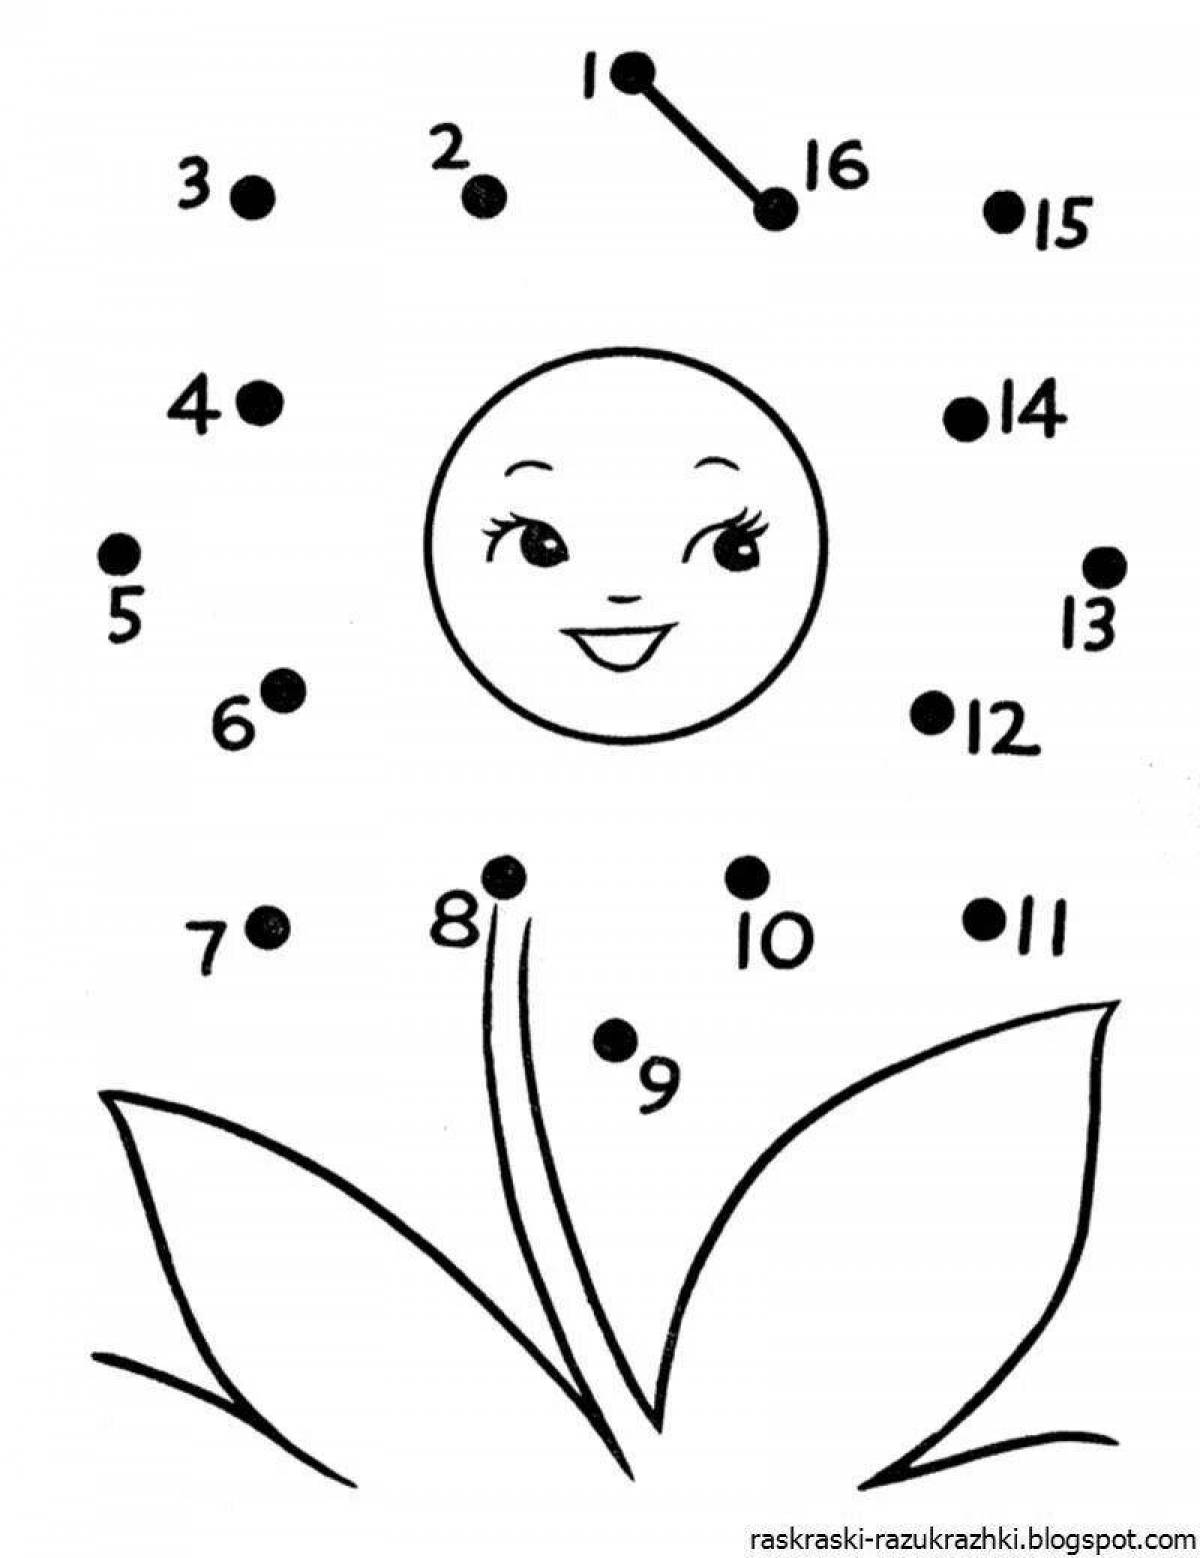 By dots for children 5 6 years old with numbers #2